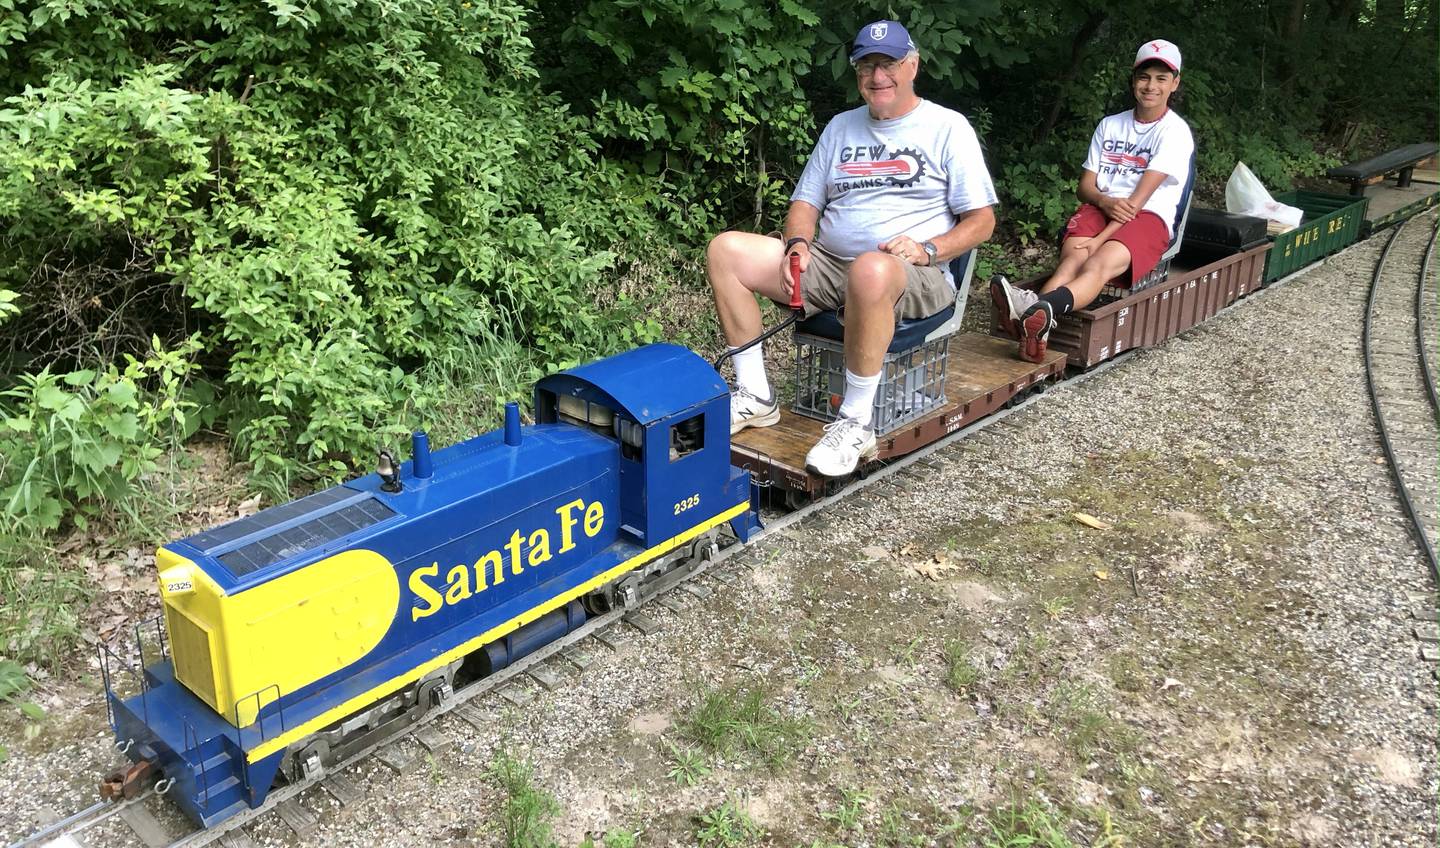 George Werderich and his grandfather George A. Werderich riding their 7.5 gauge train on the Prairie State Railroad in Plowman's Park. (photo provided)